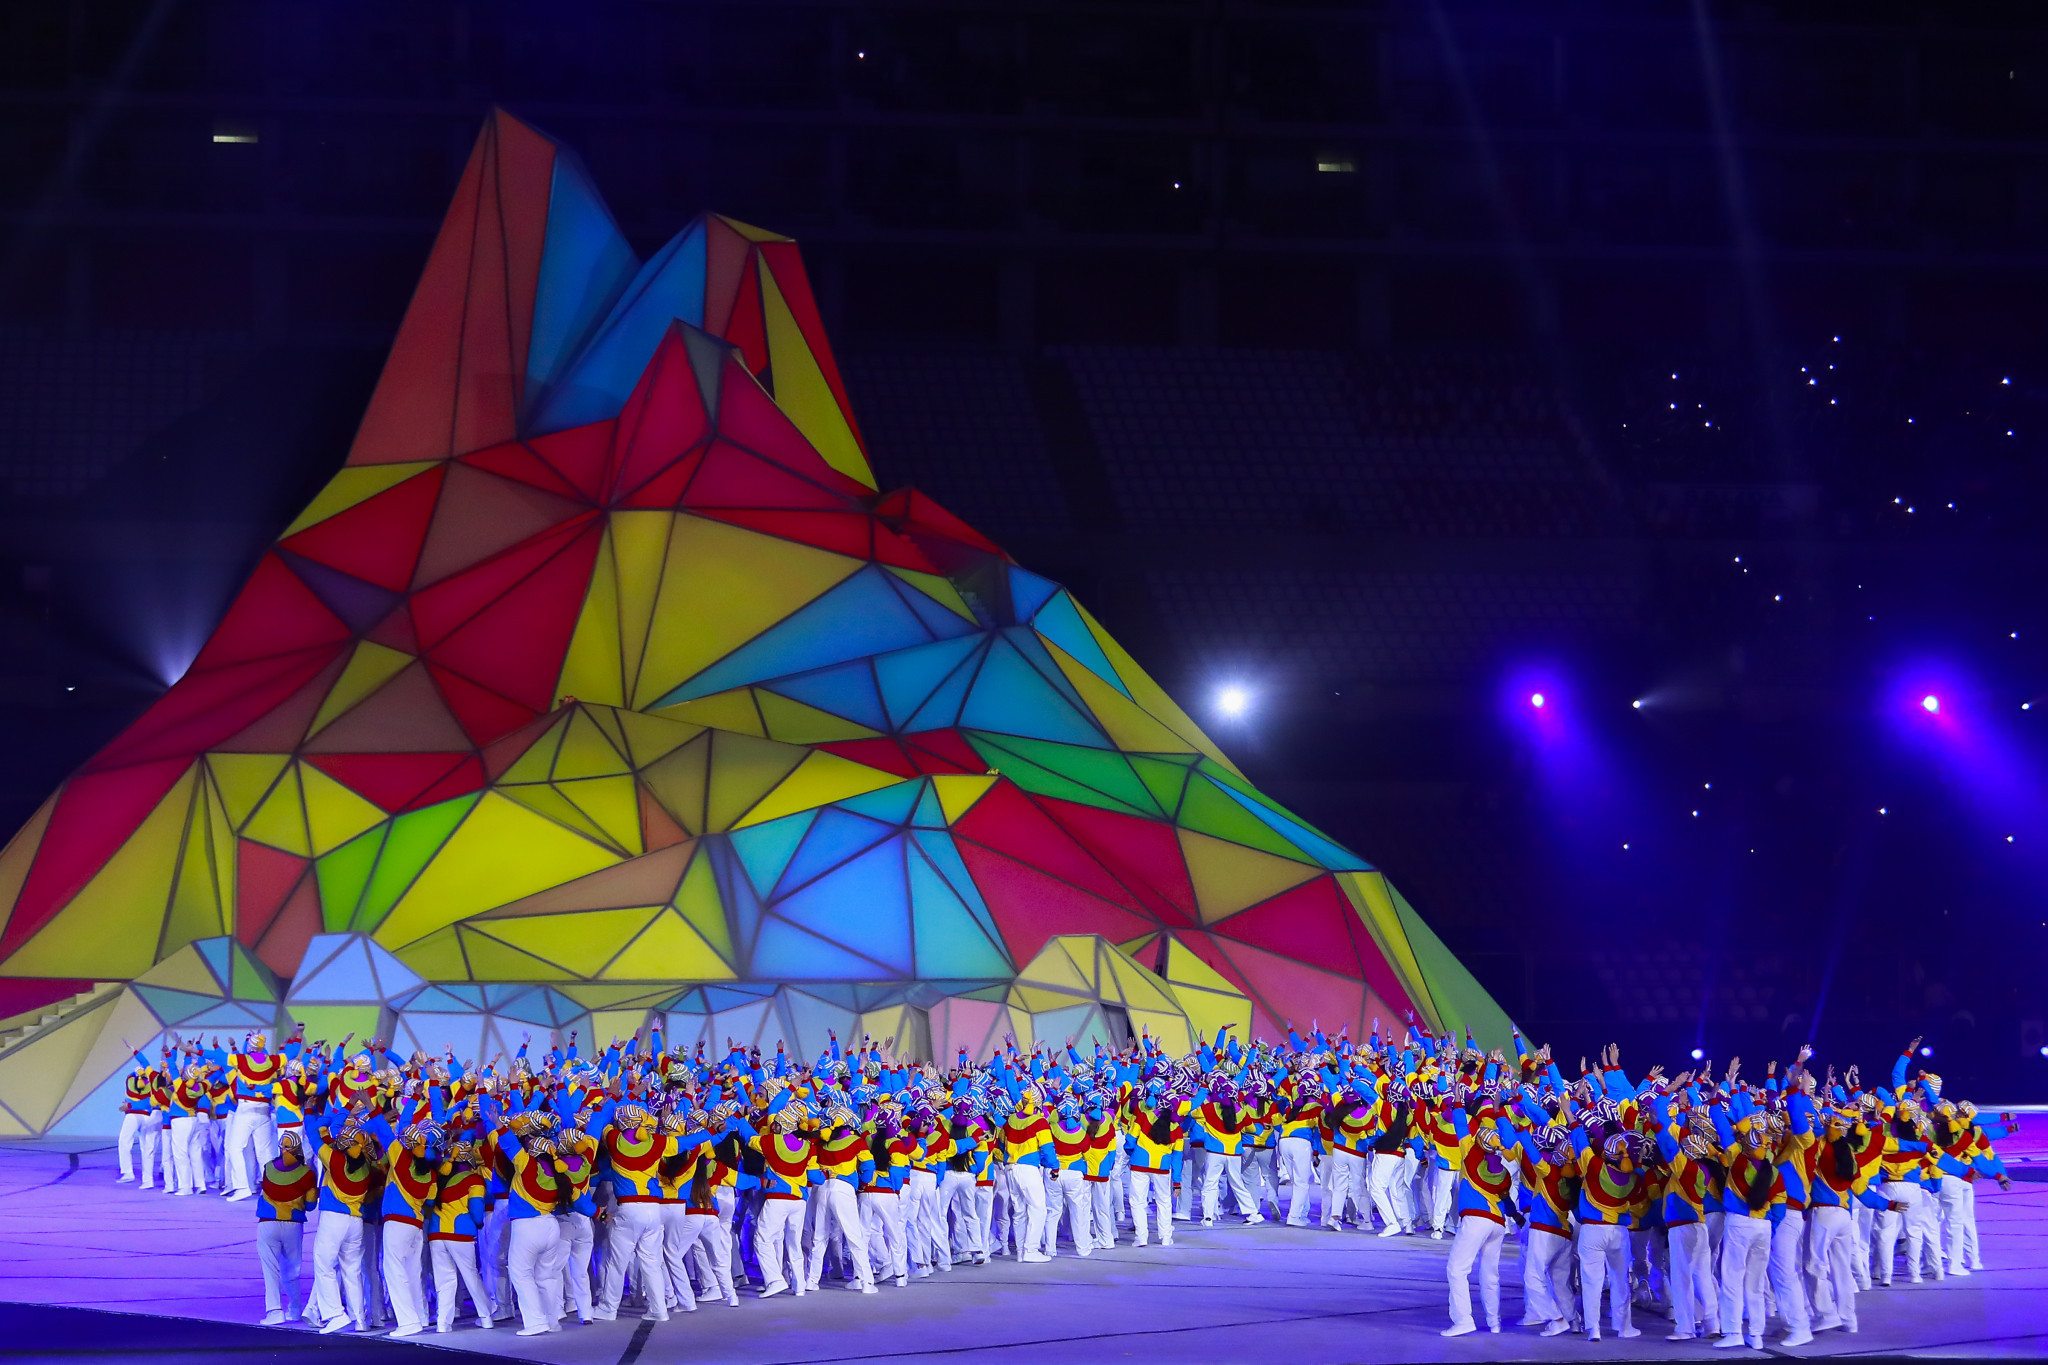 Pan American Games Opening Ceremony lights up Lima 